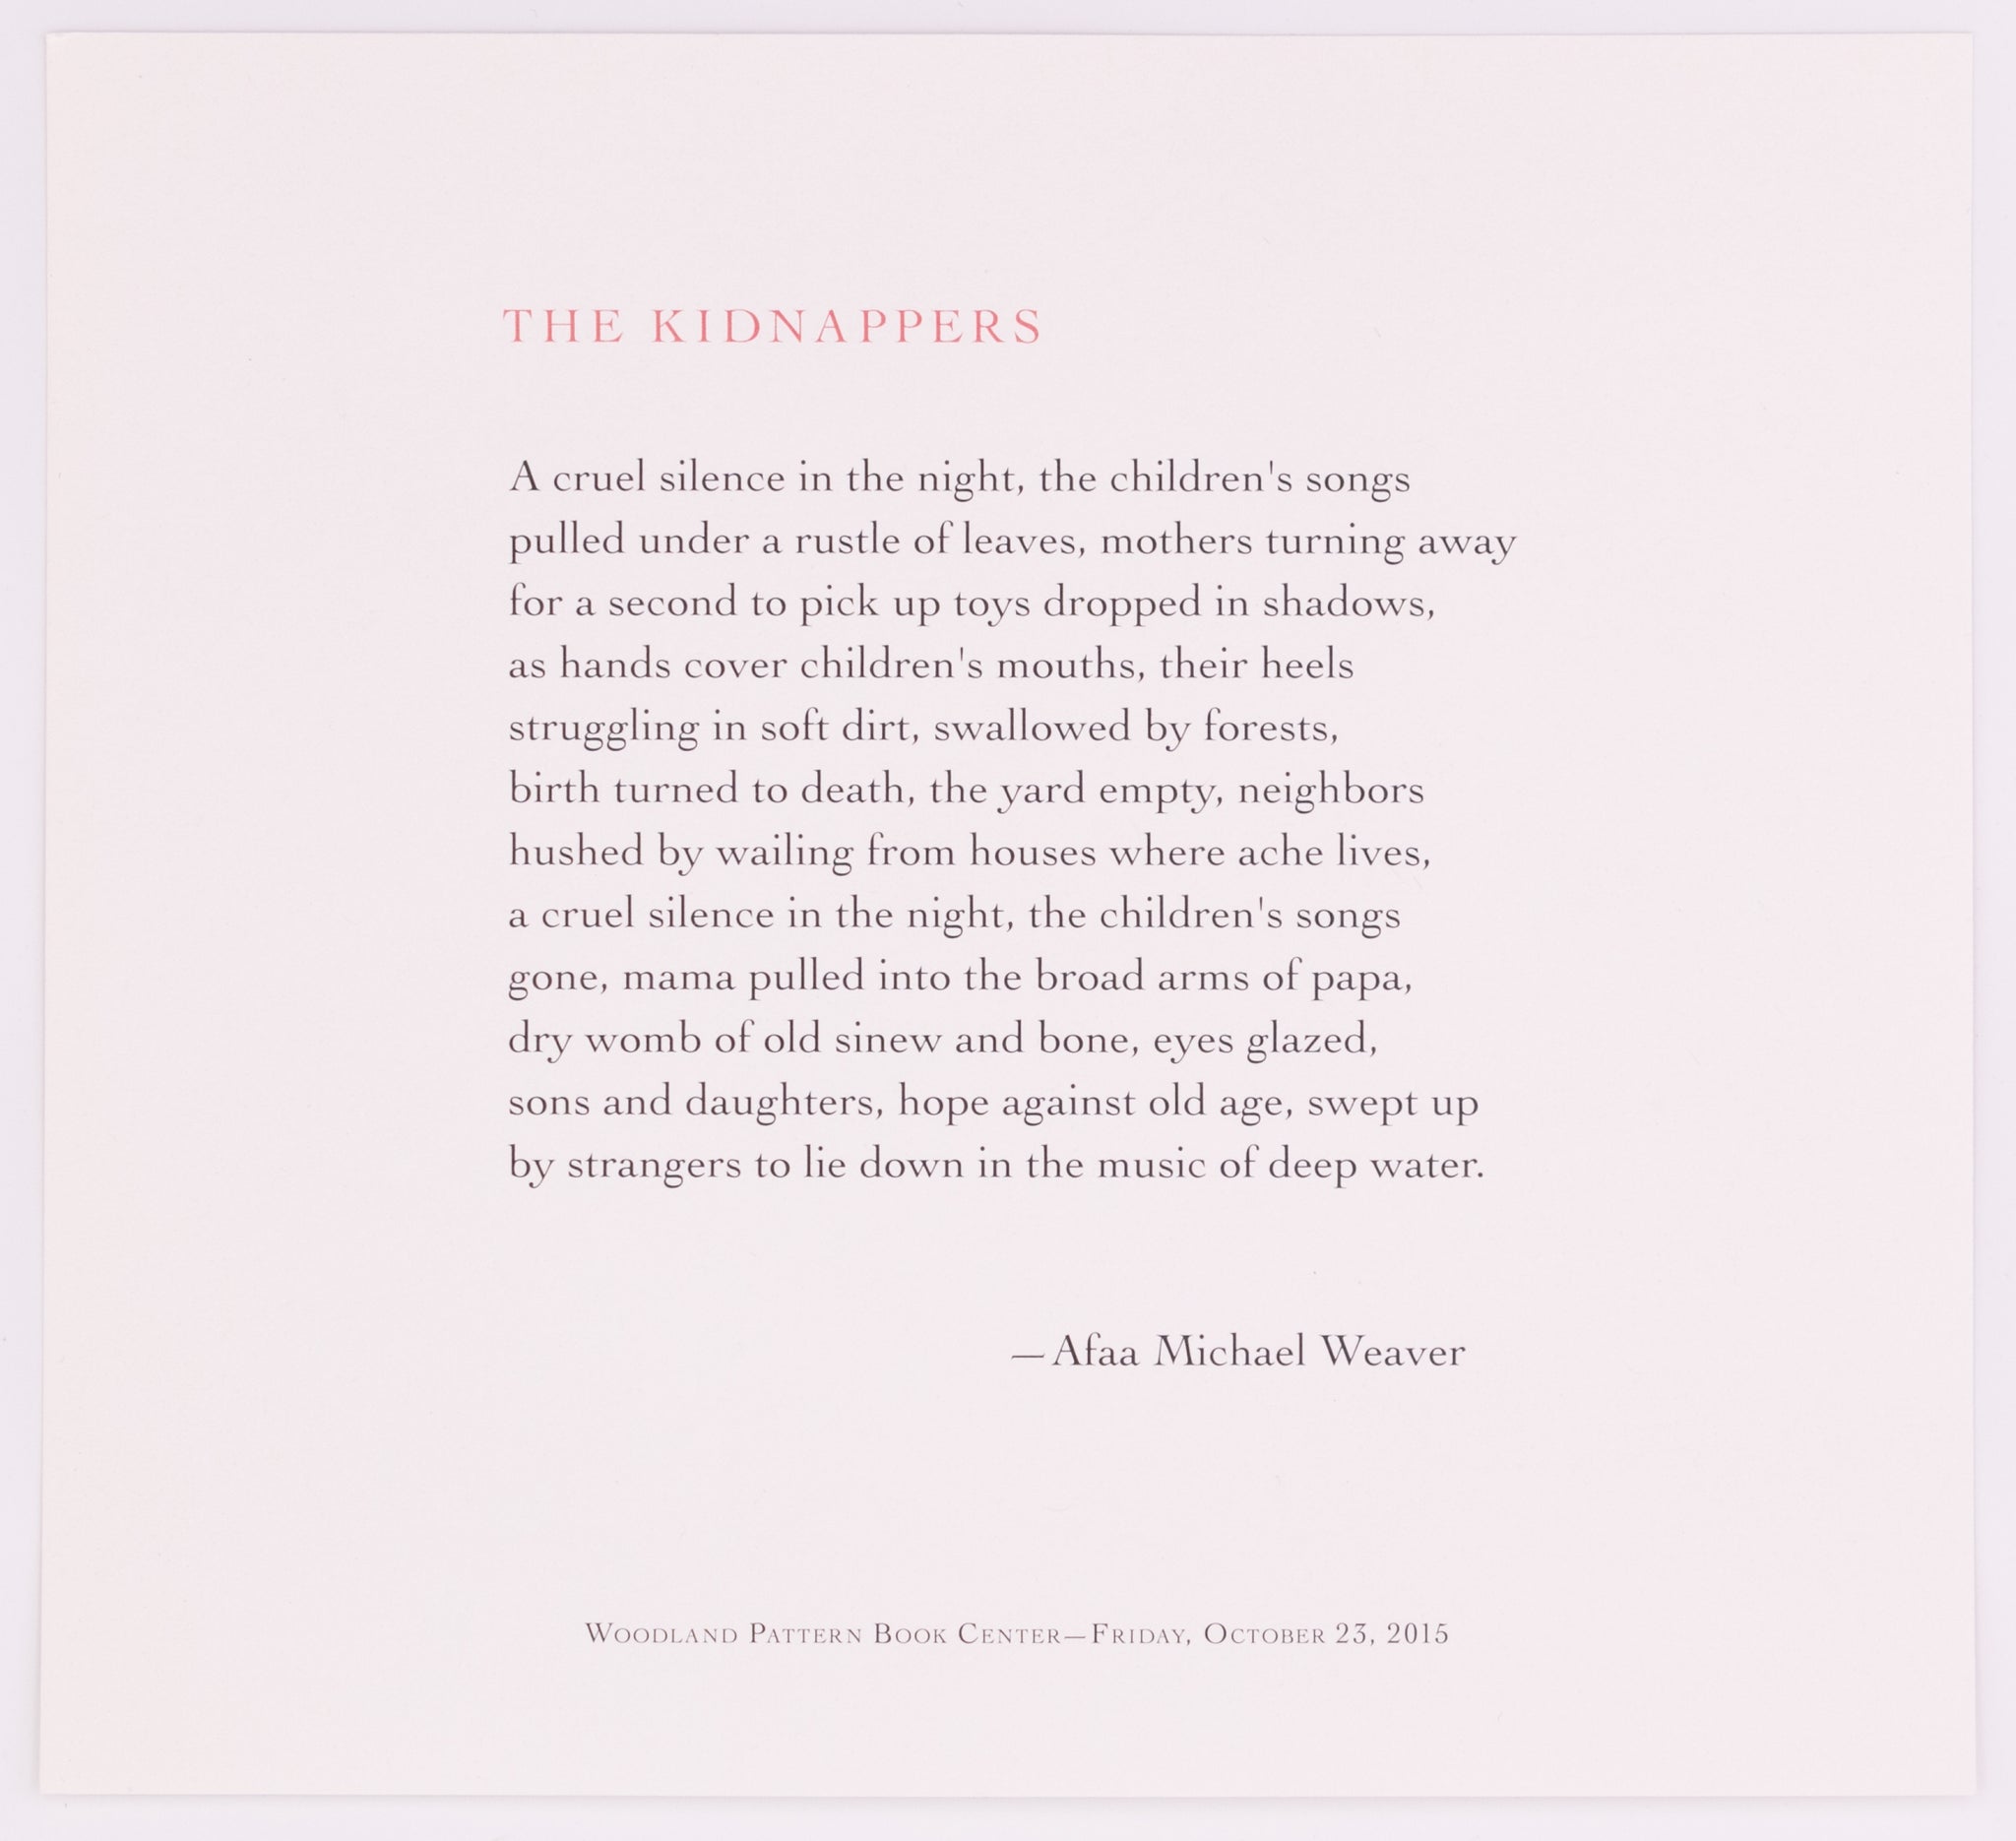 Broadside titled The Kidnappers by Afaa Michael Weaver. Red and black text on grey paper.